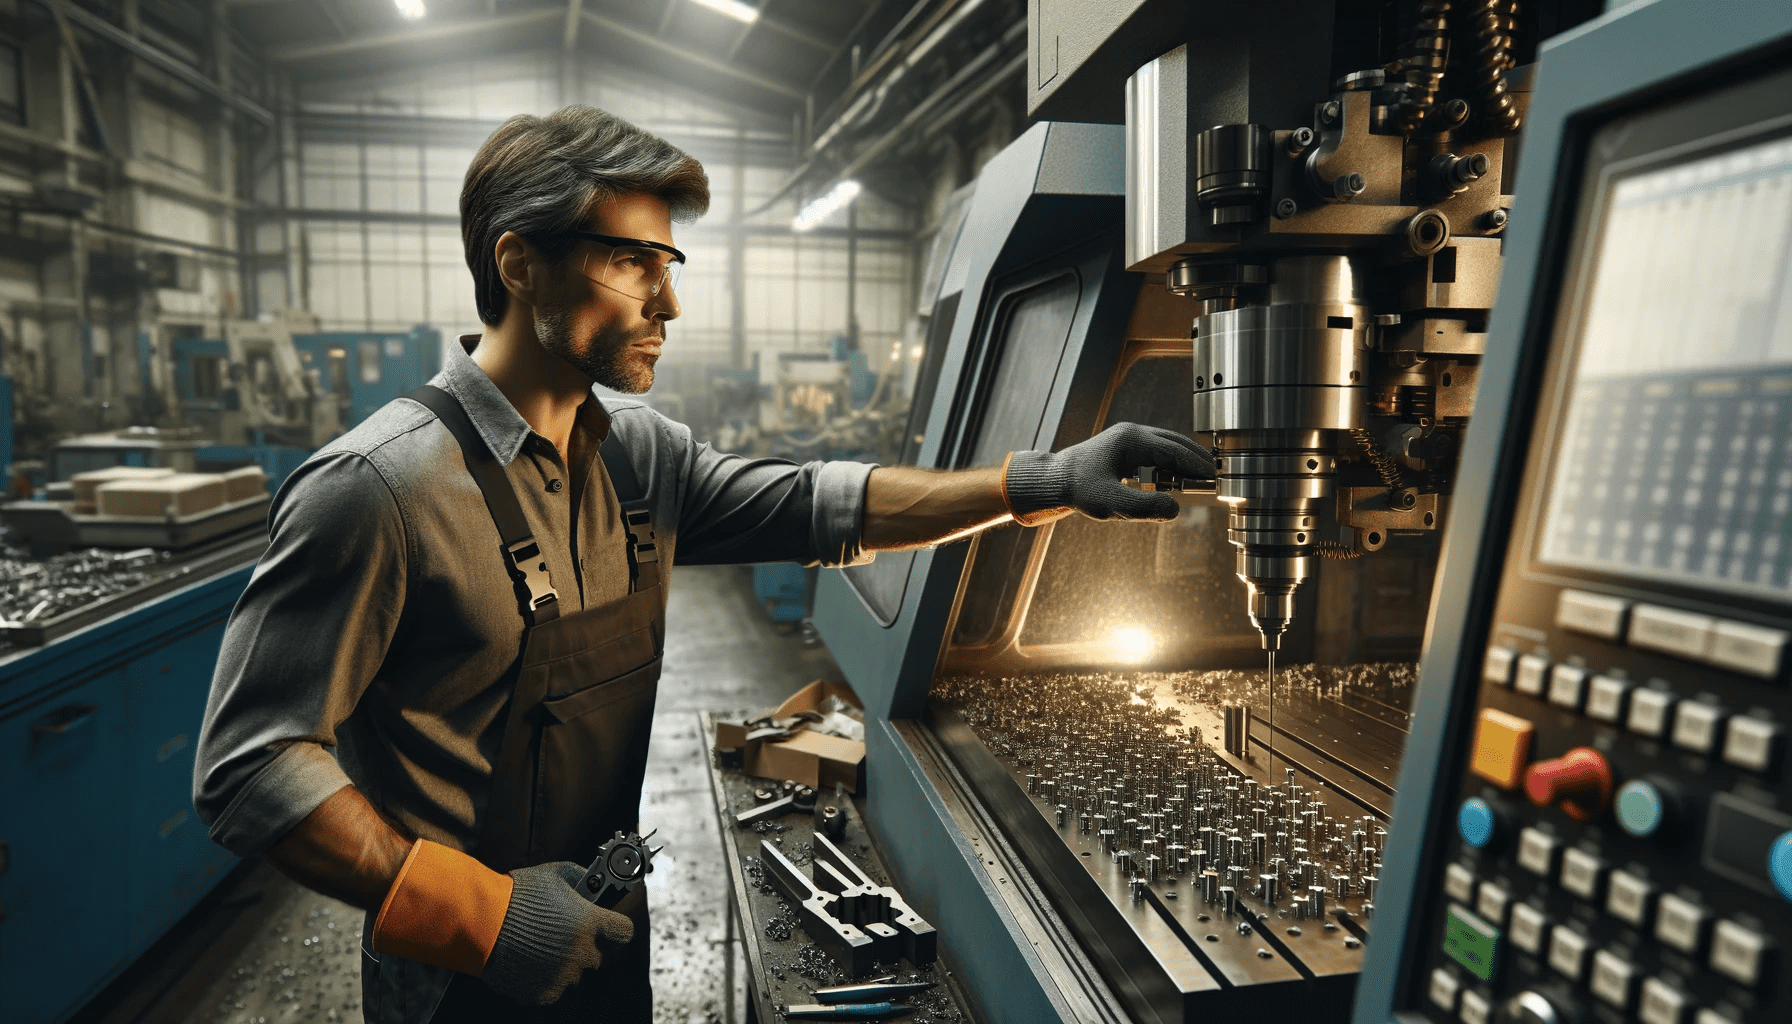 CNC machinist in a CNC workshop environment. The scene shows the machinist, a middle-aged Caucasian man, wearing protective gea